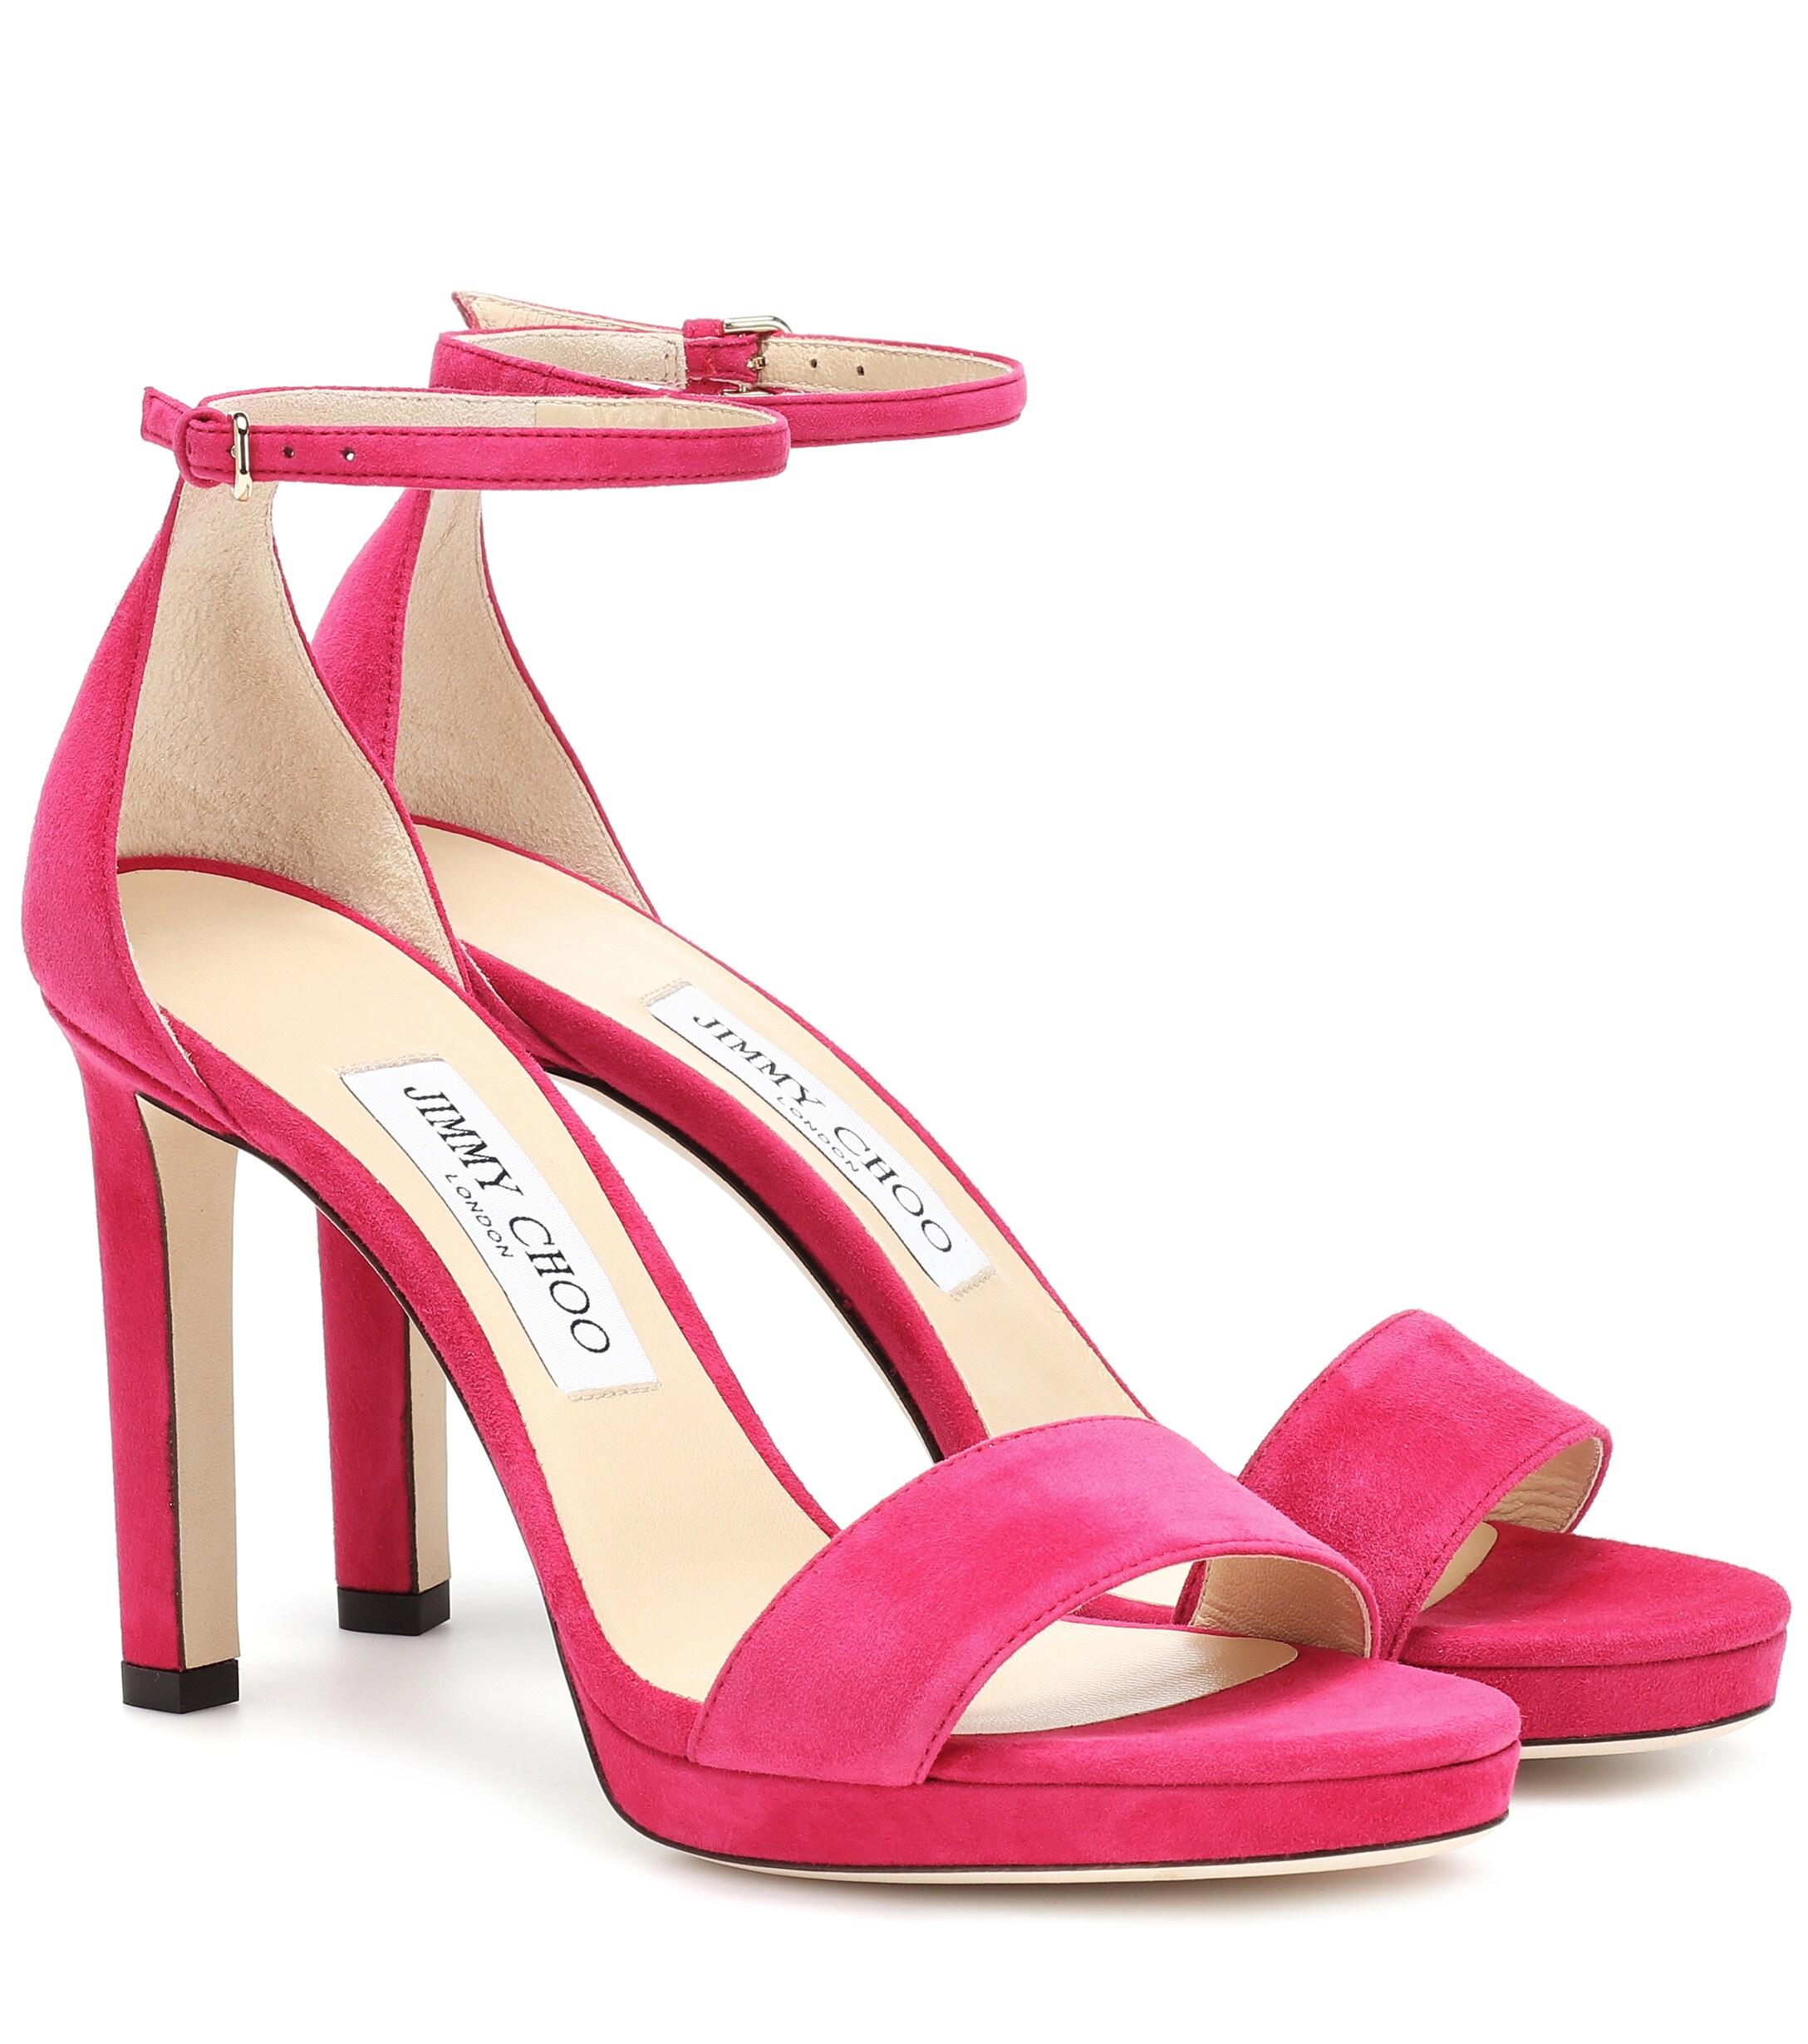 Jimmy Choo Misty 100 Suede Sandals in Raspberry (Pink) - Save 40% - Lyst